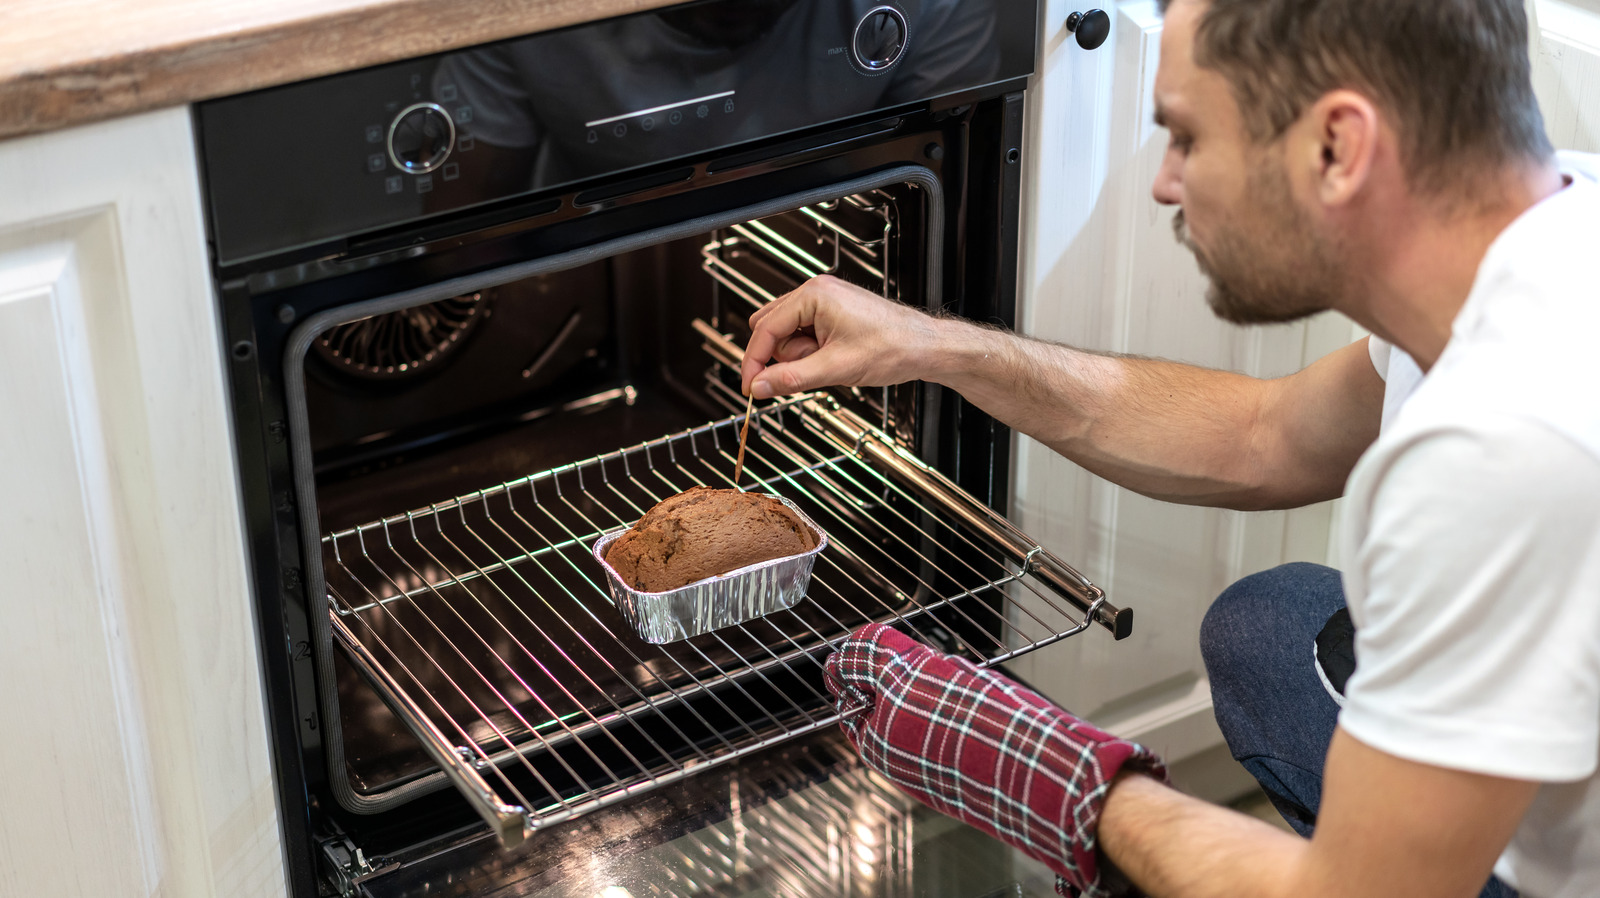 13 Mistakes You're Probably Making With Your Convection Oven